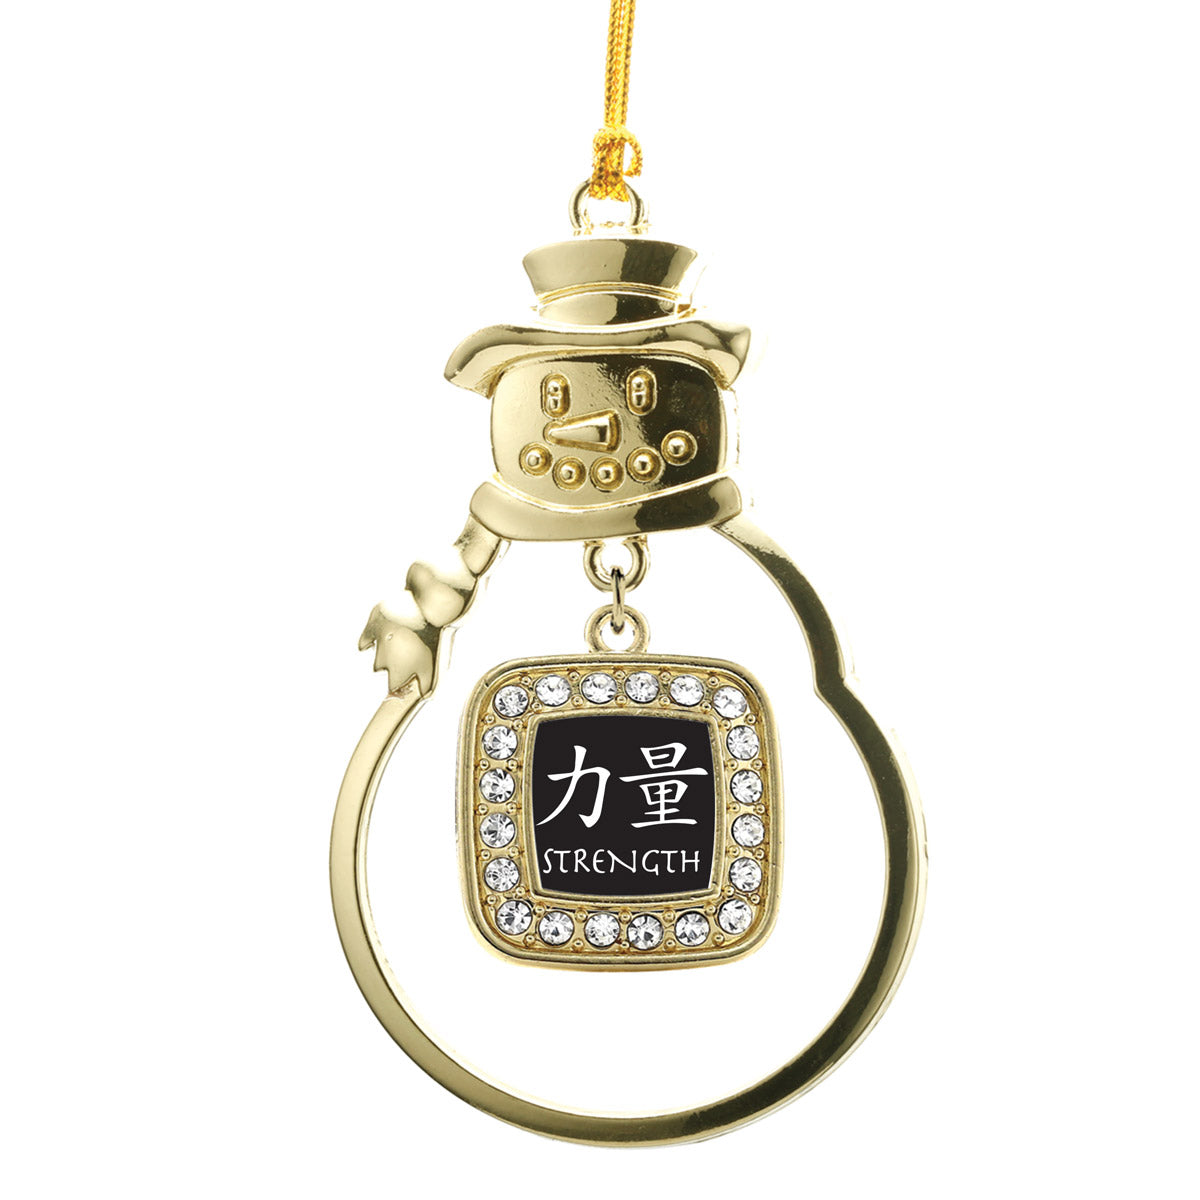 Gold Strength in Chinese Square Charm Snowman Ornament